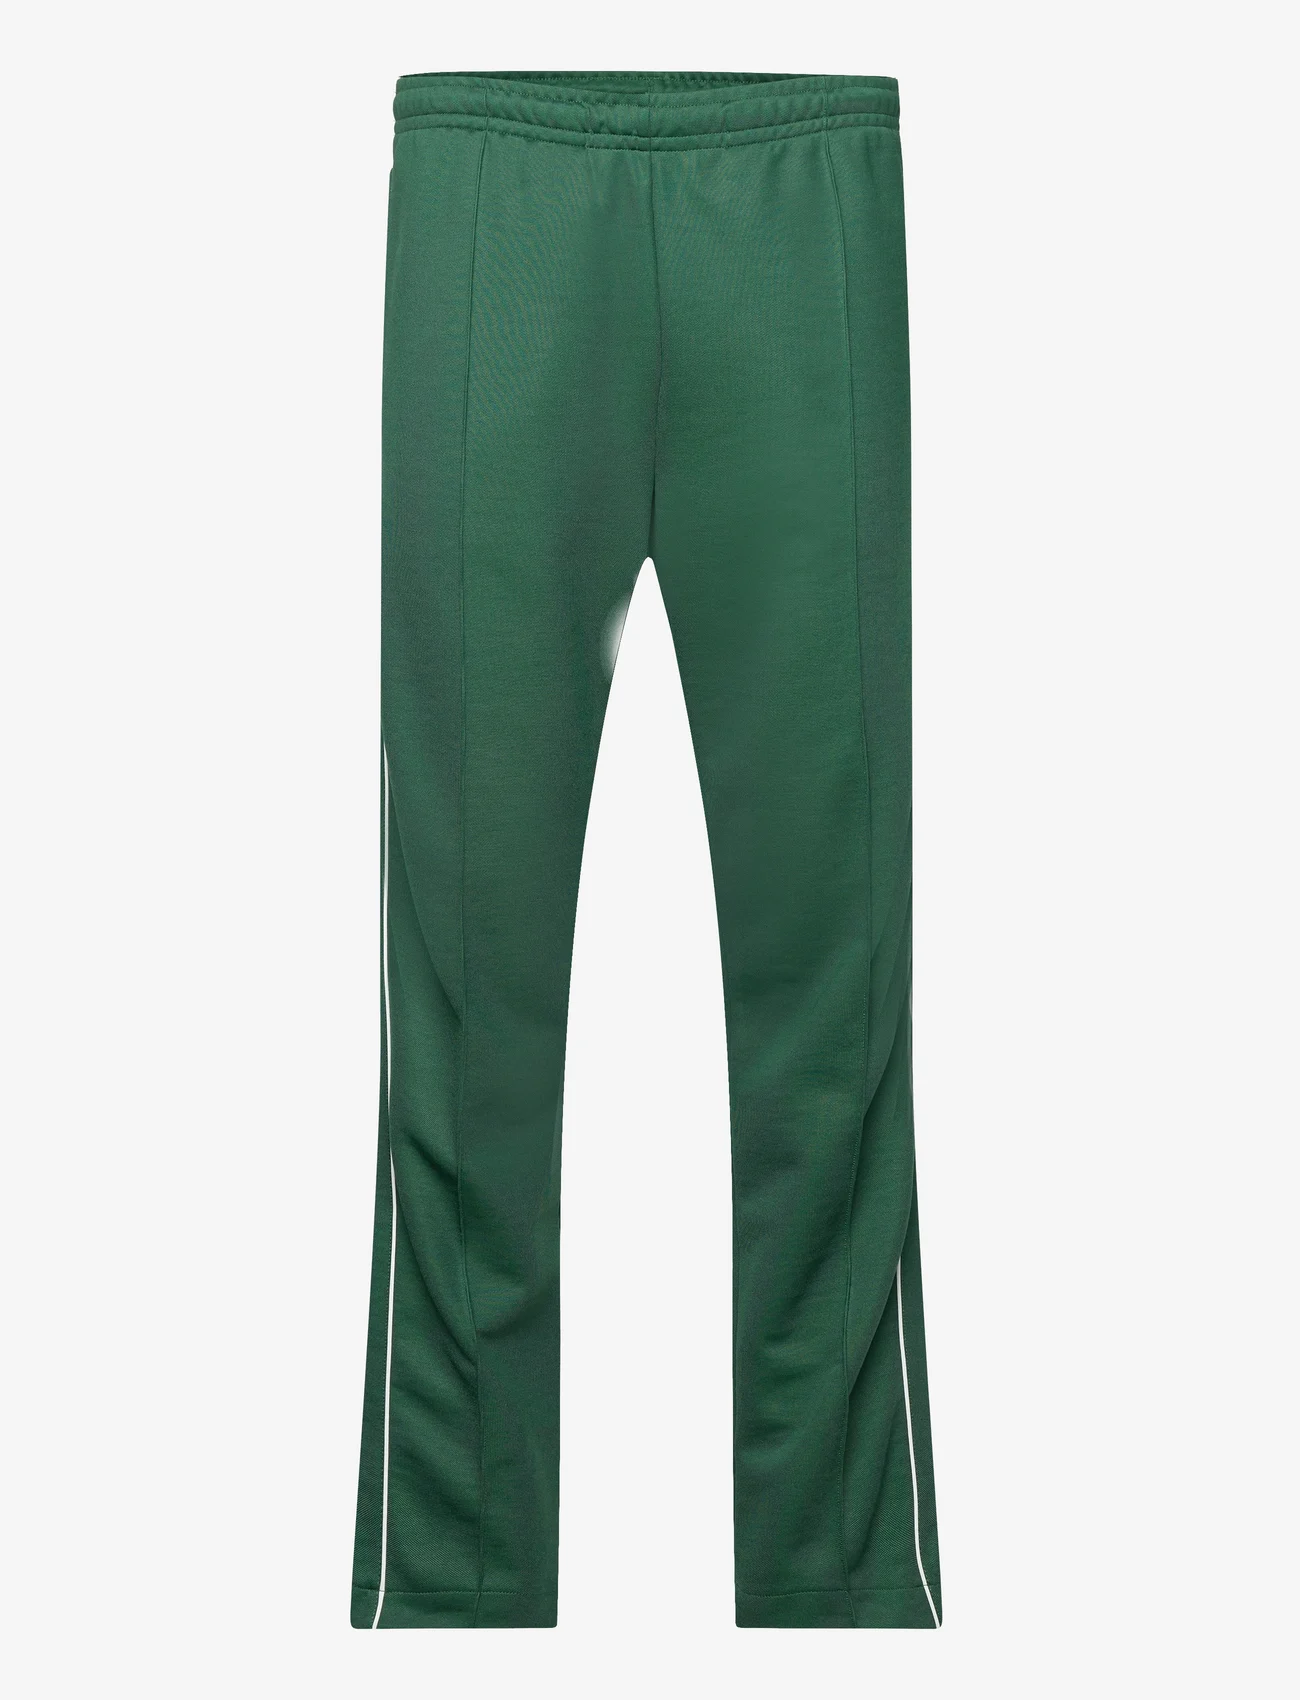 Lacoste - TRACKSUITS & TRACK TR - pants - green - 0